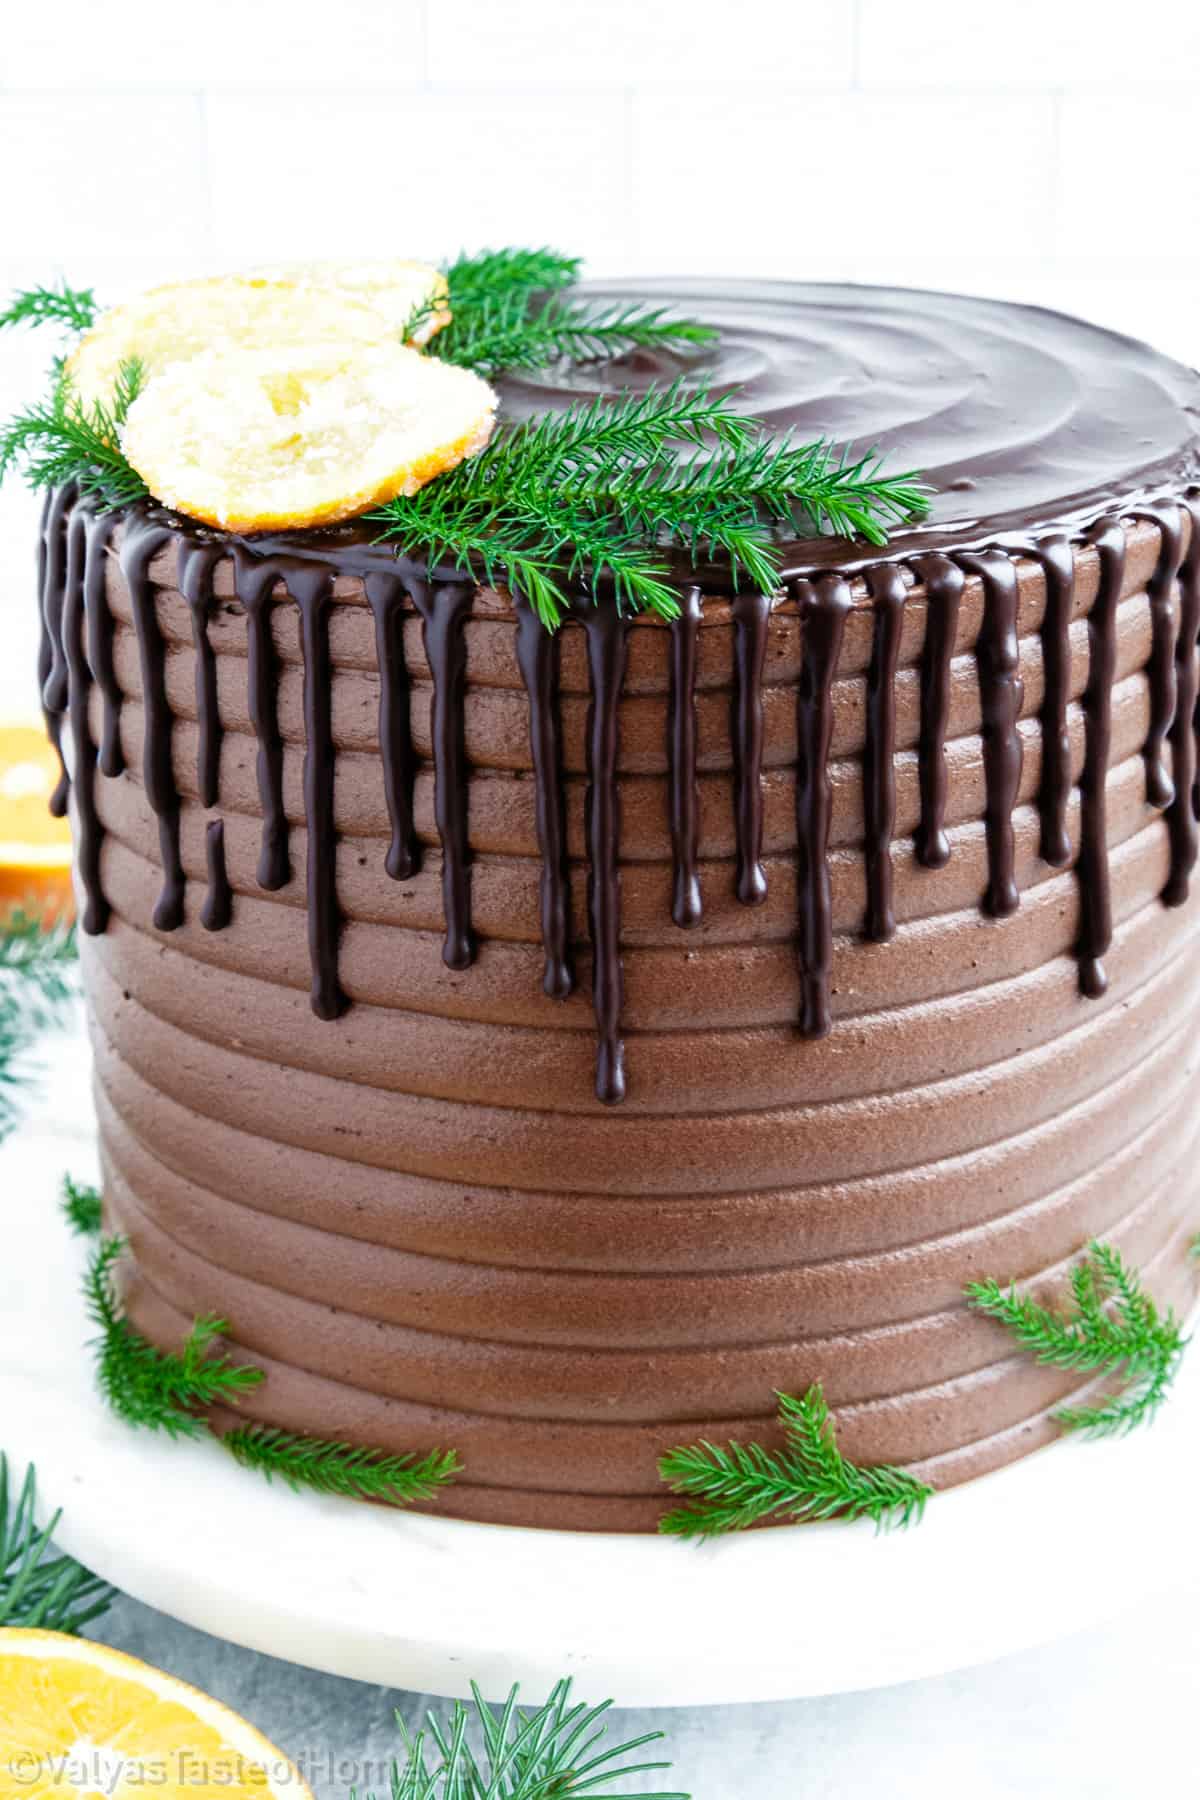 f you're a fan of sweet and tangy desserts, this Chocolate Orange Cake is a match made in heaven for you. The rich orange cake layered with chocolate buttercream frosting creates an irresistibly moist and flavorful dessert.